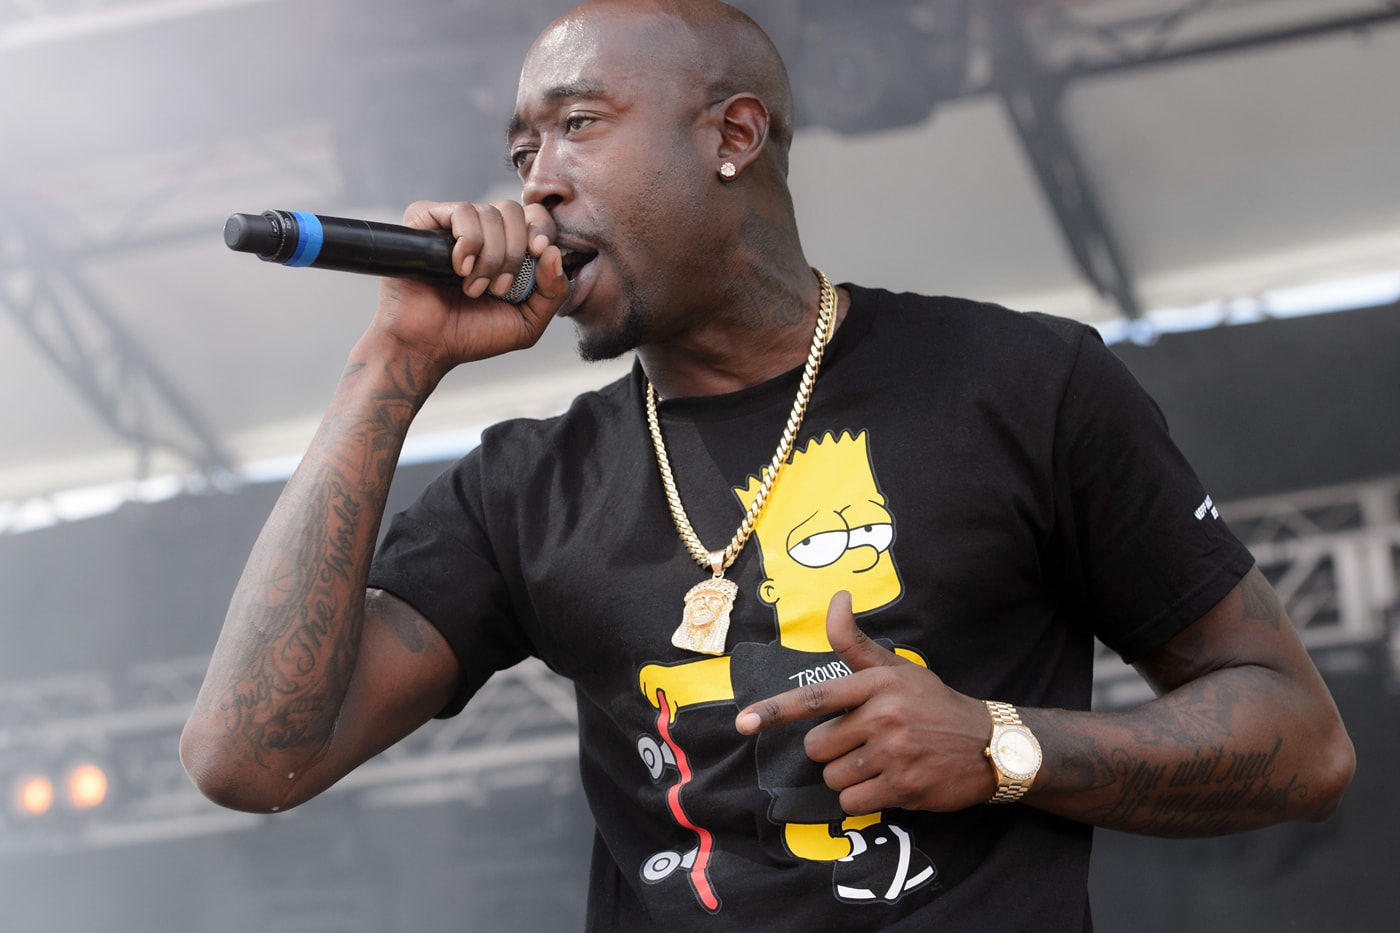 Freddie Gibbs featuring YP - Something New (Produced by Million $ Mano)